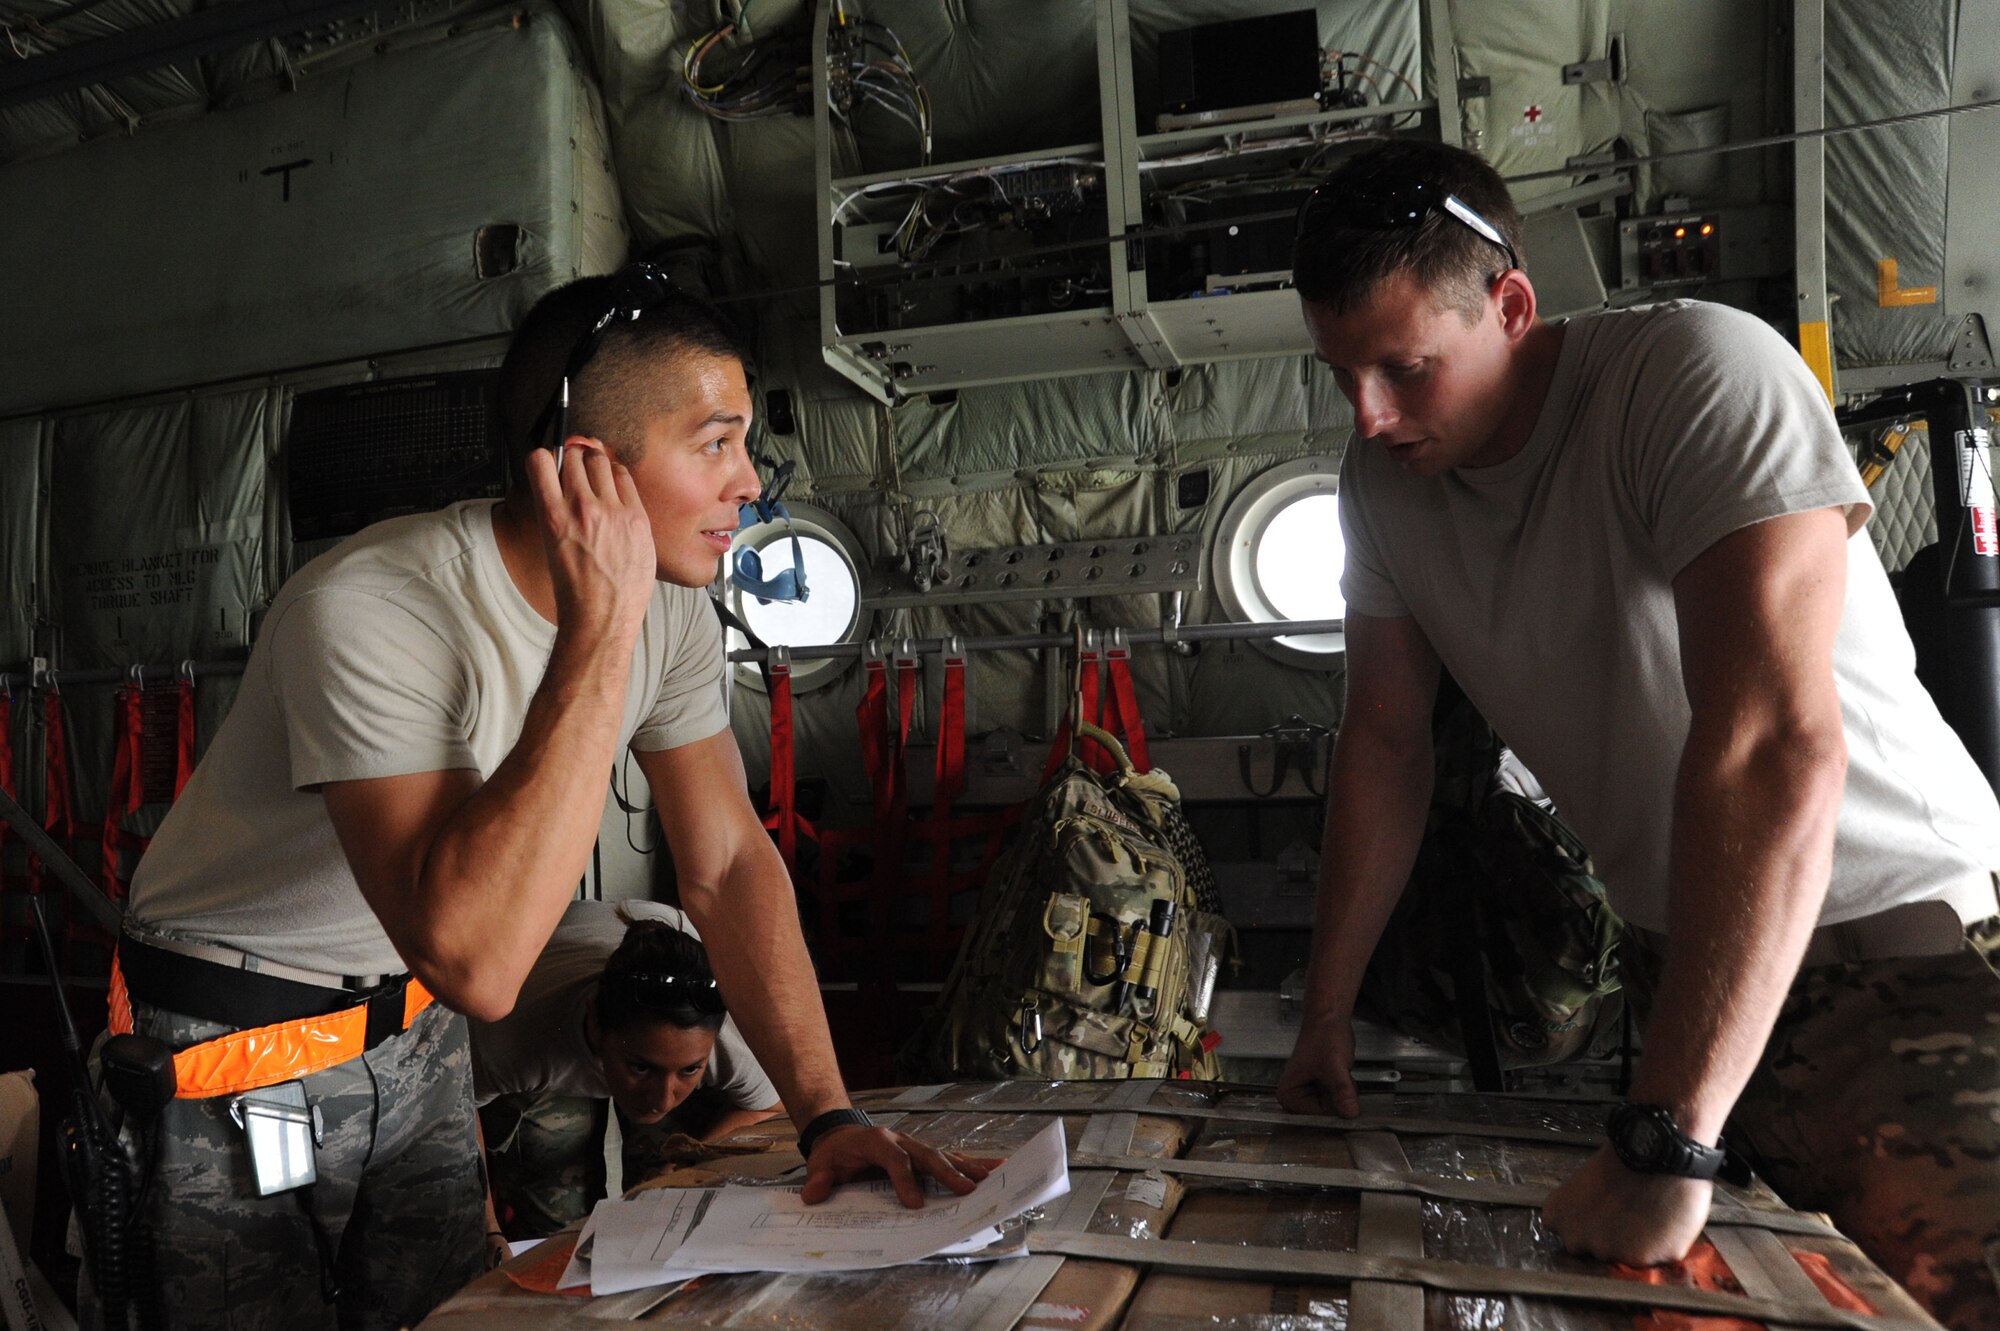 Staff Sgt. Oscar Sorto, left, 386th Expeditionary Logistics Readiness Squadron air terminal operations center ramp controller, discusses the load with Staff Sgt. Drew Schubauer, 746th Expeditionary Airlift Squadron loadmaster, July 21, 2016 at an undisclosed location in Southwest Asia. The ATOC is the nerve center of operations for the 386 ELRS aerial port and provides the rest of the team with updates on mission status. (U.S. Air Force photo/Senior Airman Zachary Kee)